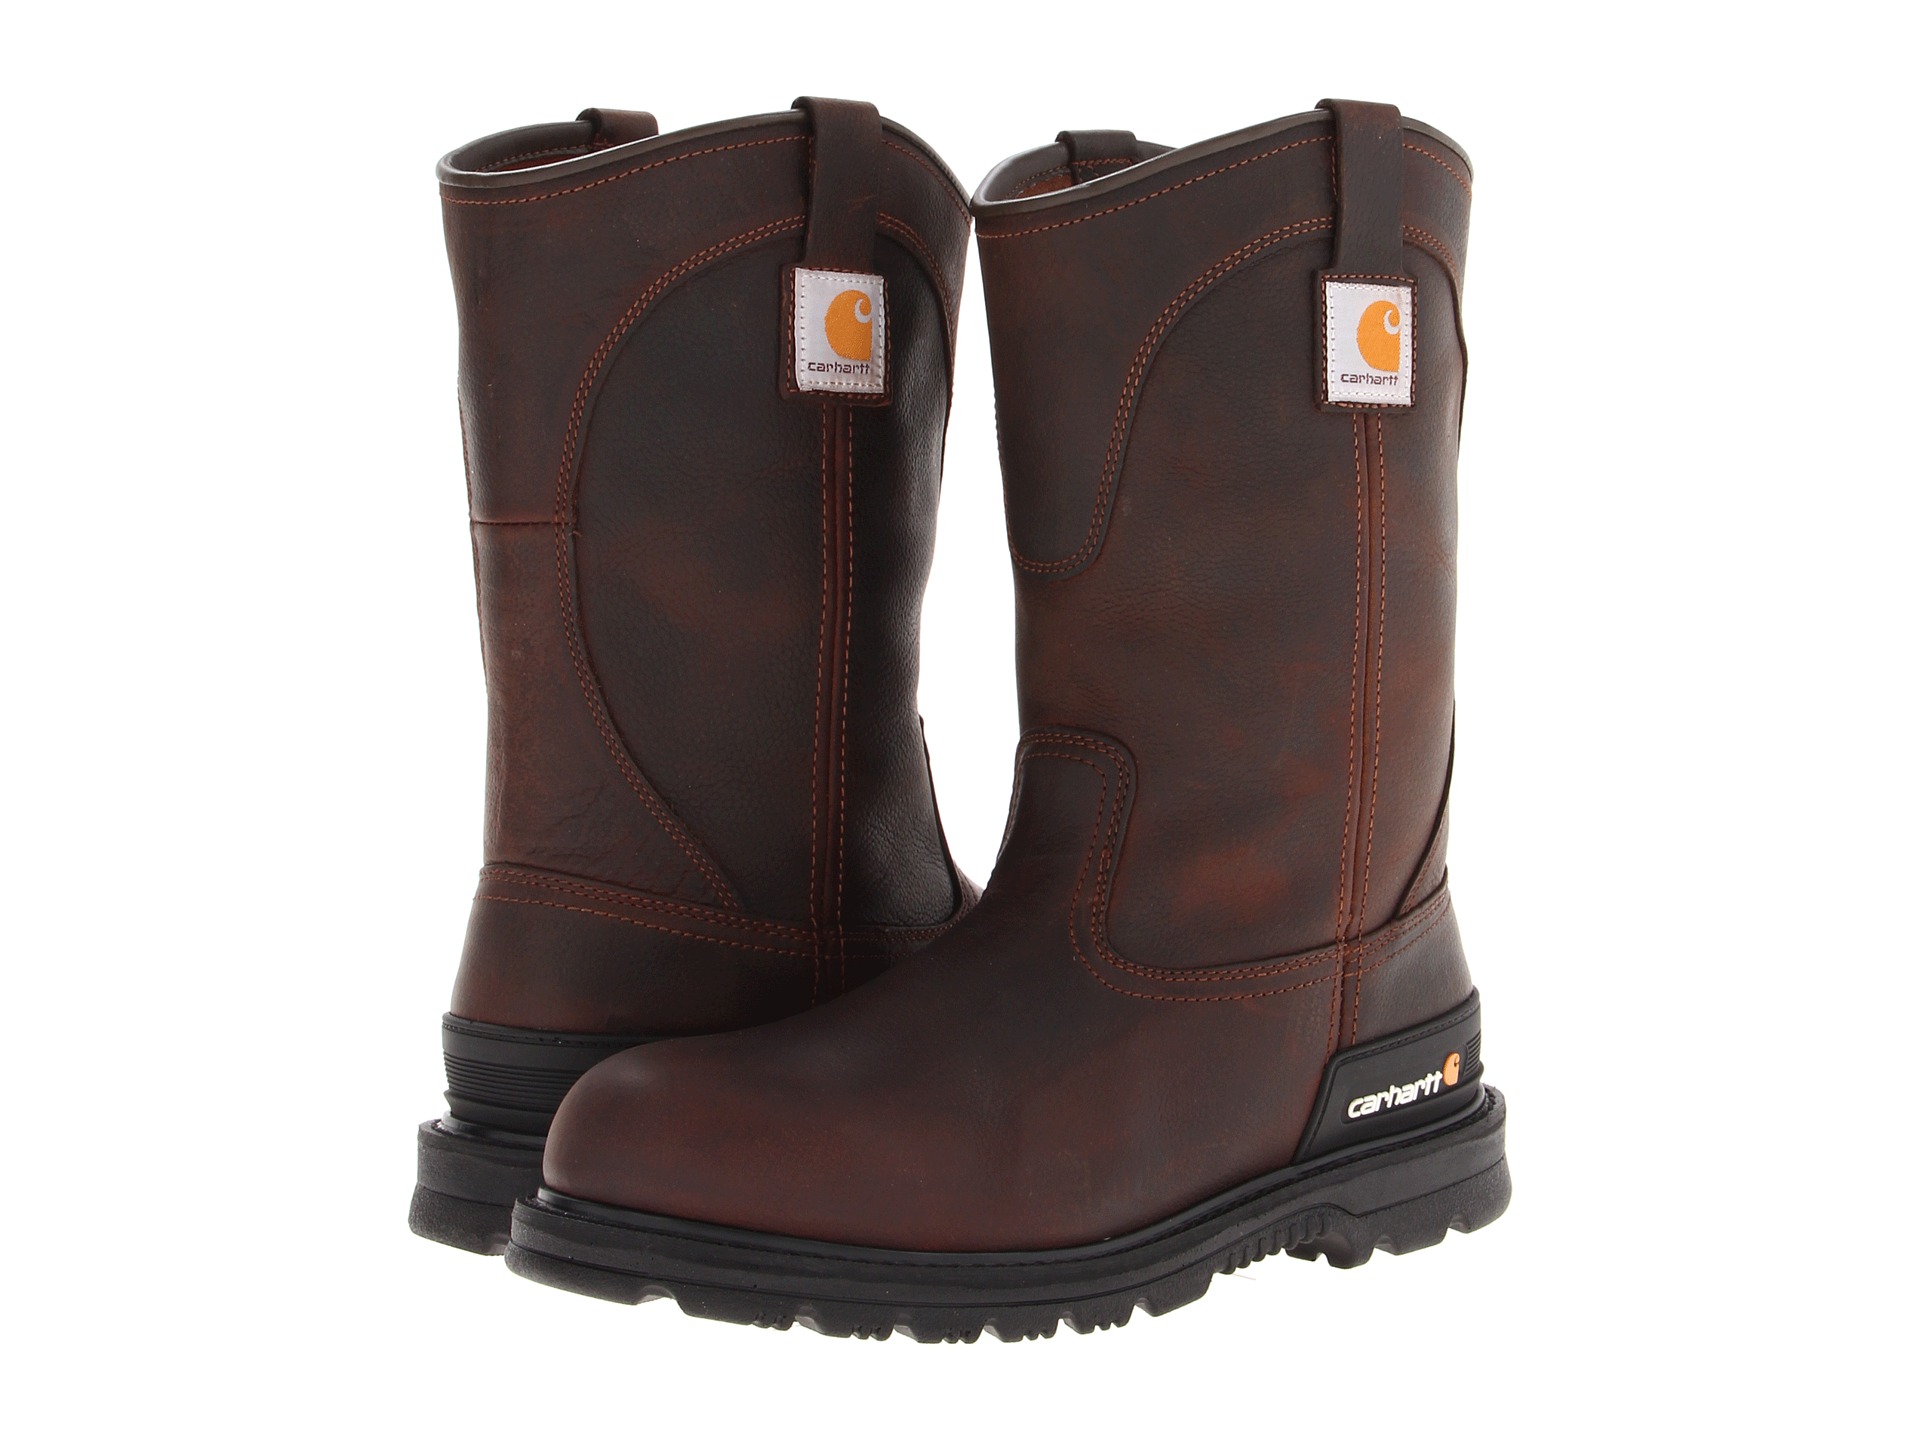 Carhartt Wellington Unlined Boot - Zappos Free Shipping BOTH Ways